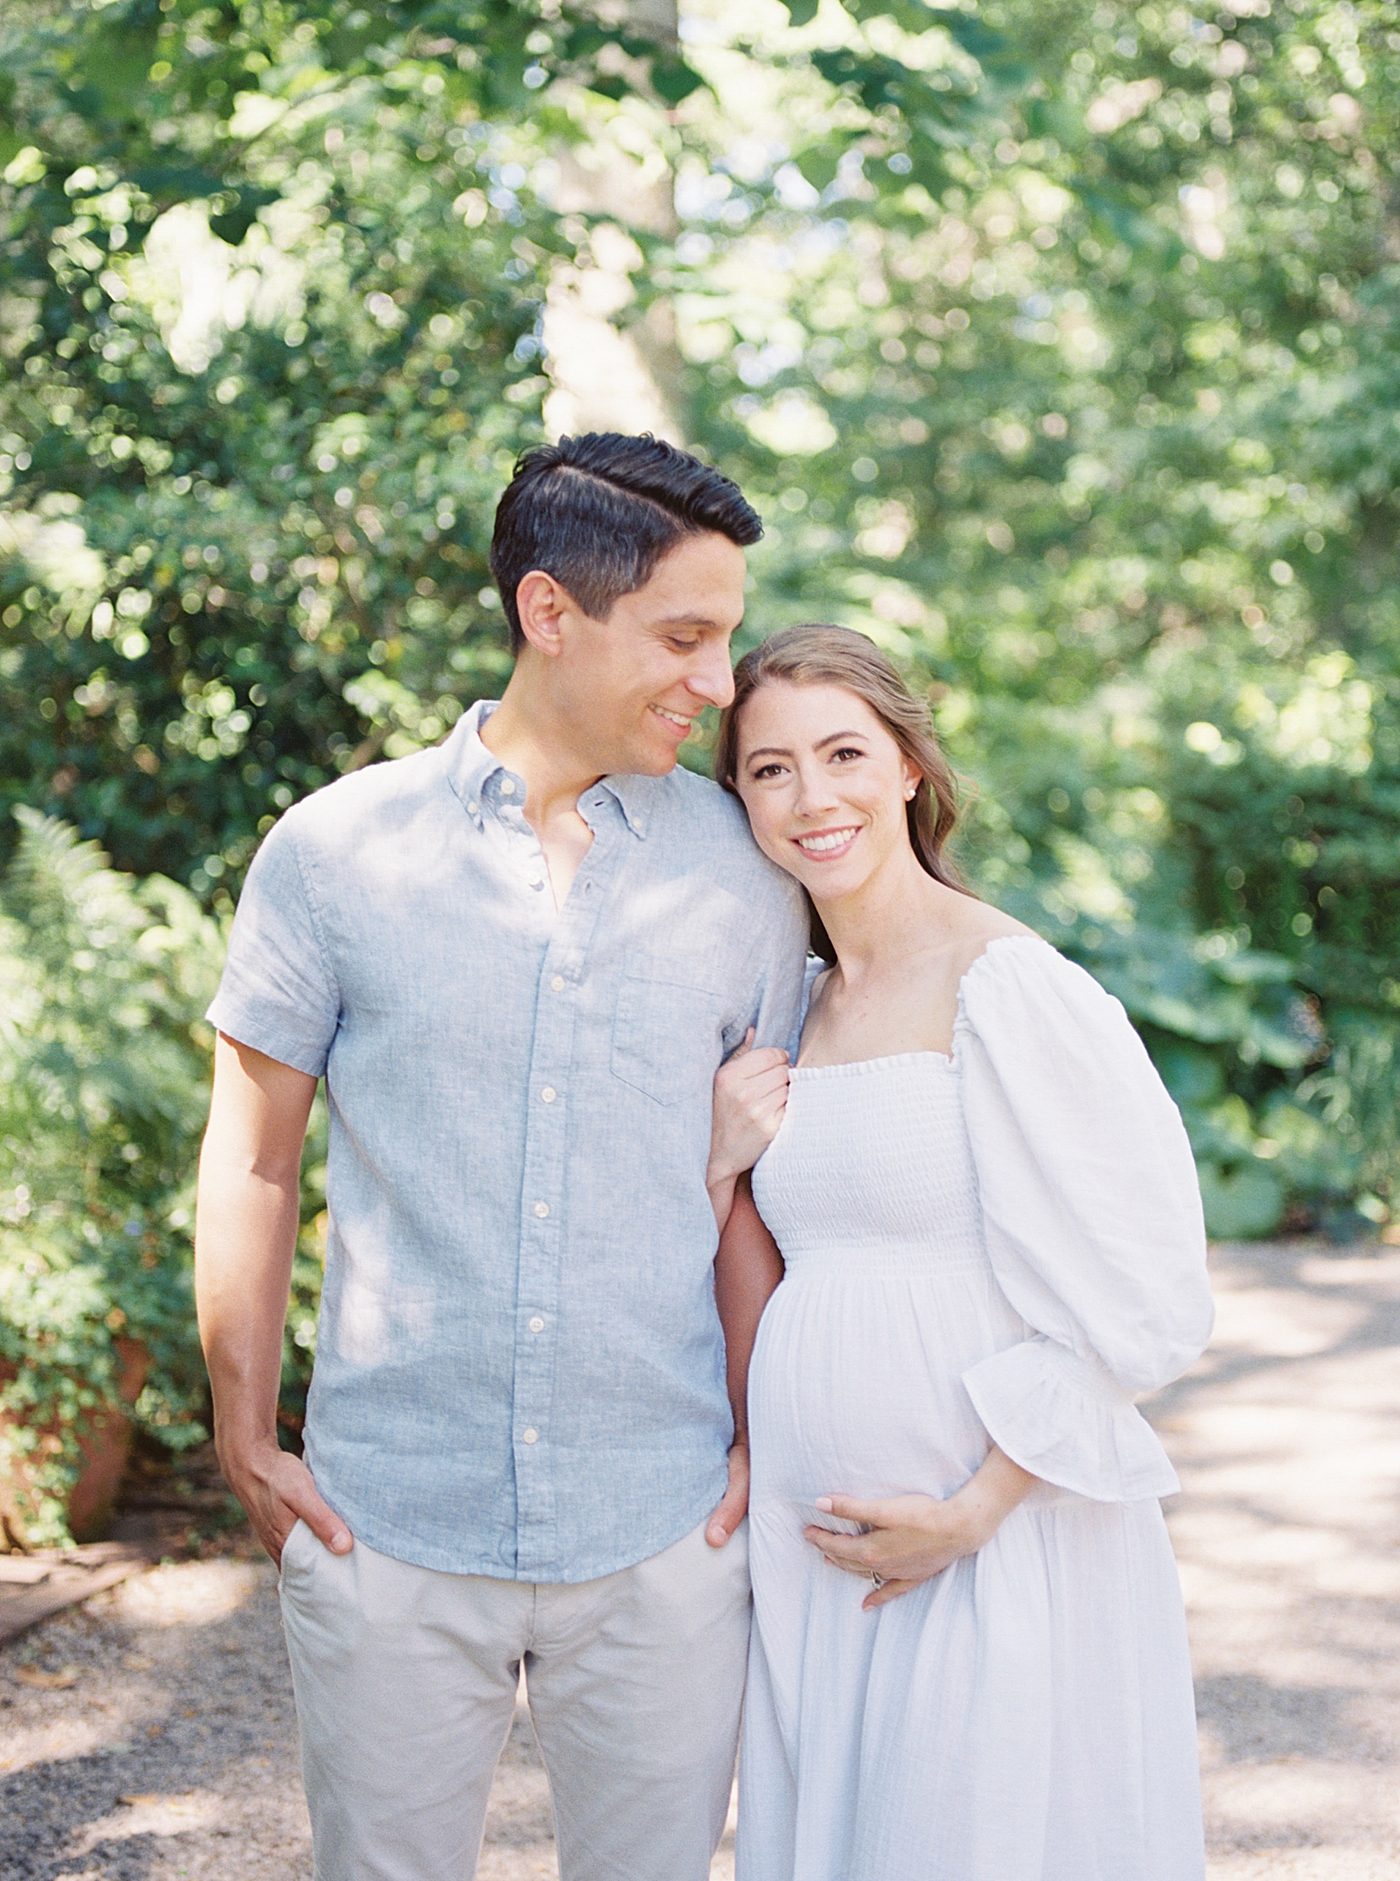 Mom and dad to be snuggling walking down the sidewalk | Photo by Caitlyn Motycka Photography